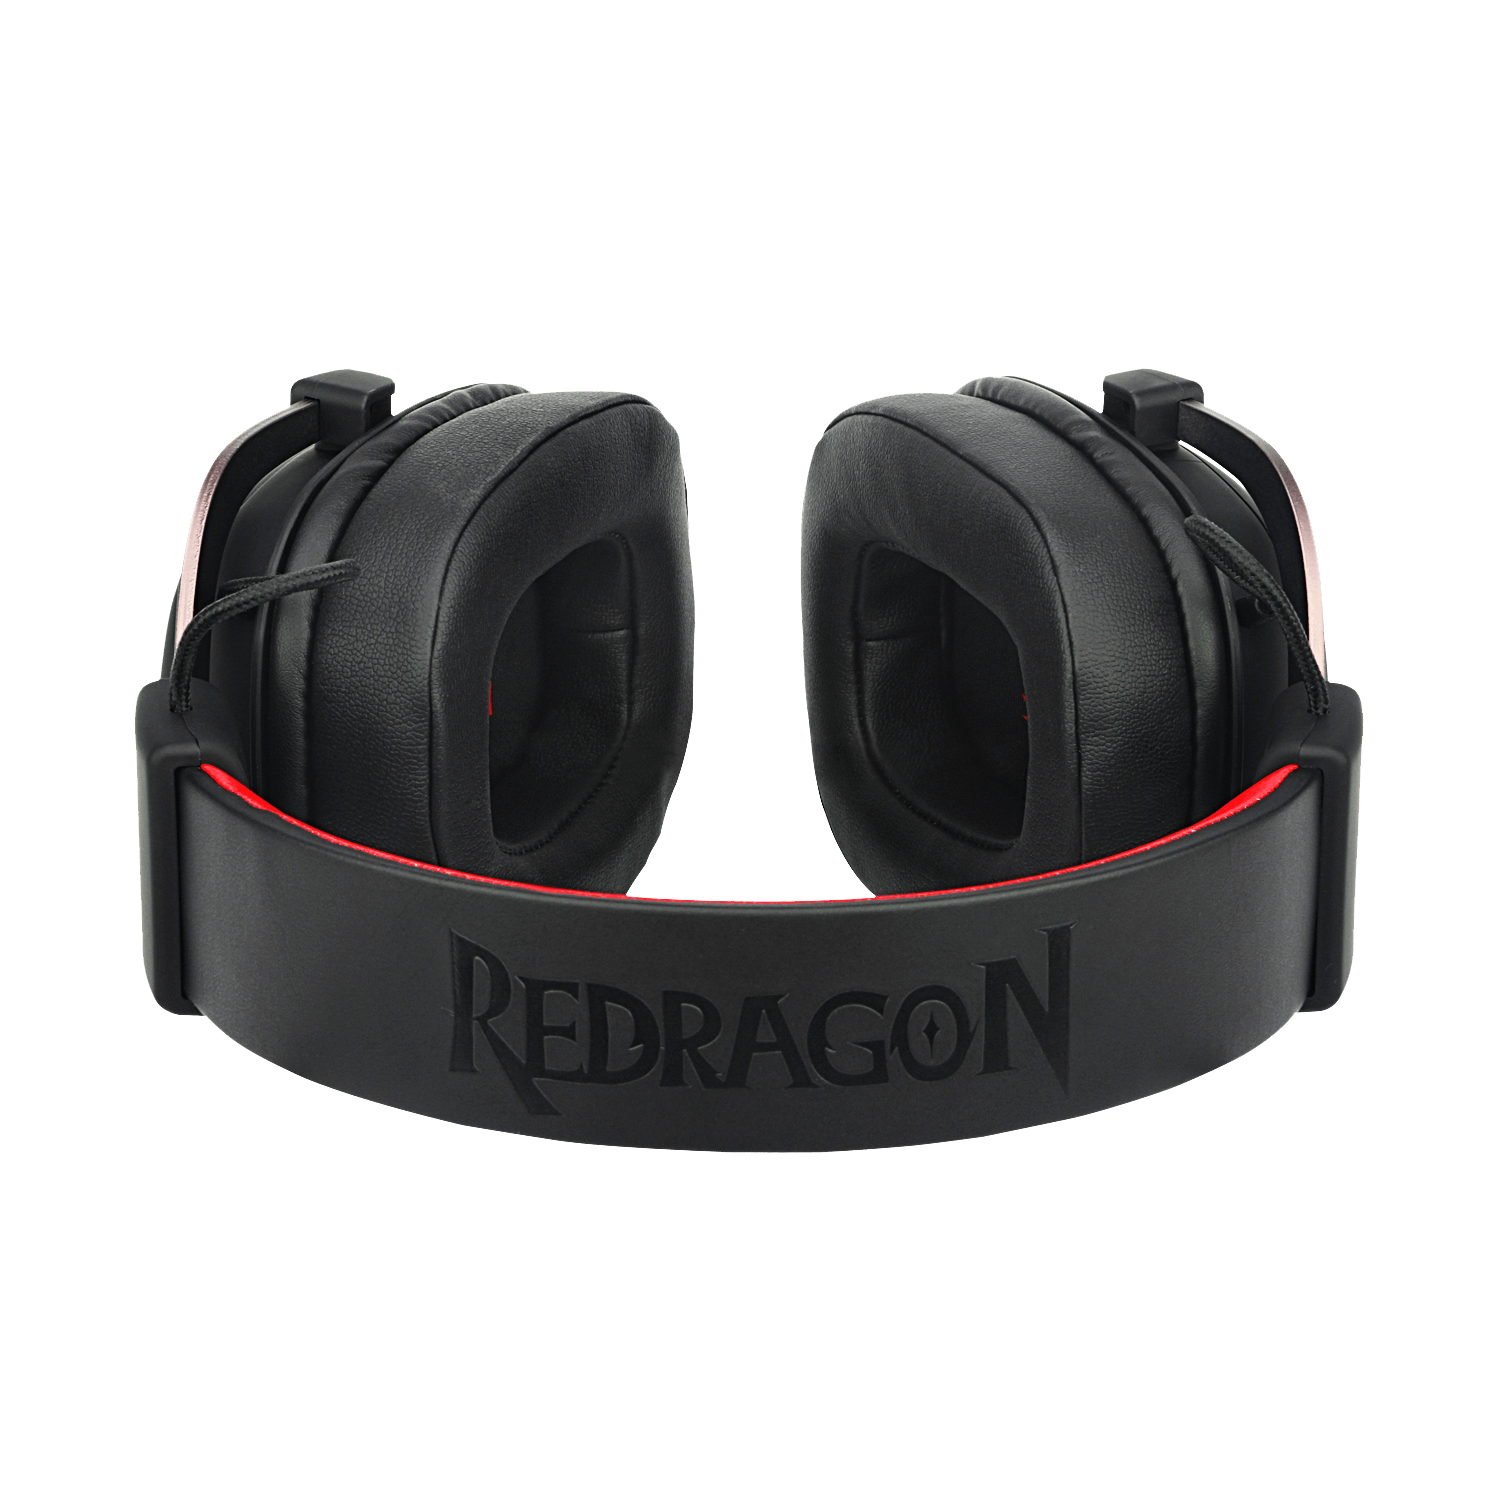 headset gamer redragon zeus all-in-one, h510